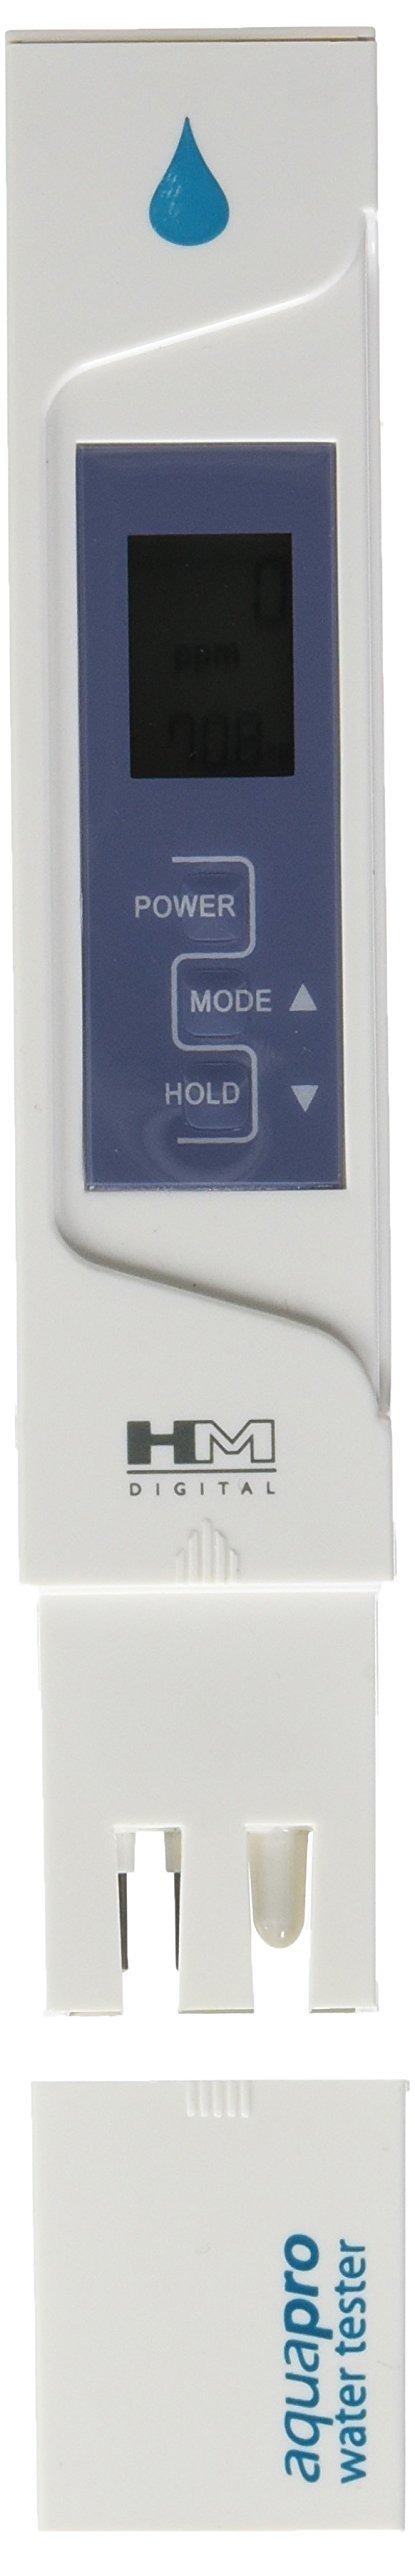 HM Digital AP-1 AquaPro Water Quality Total Dissolved Solids Tester, 0-5000 ppm TDS Range, 1 ppm Resolution, +/- 2% Readout Accuracy (Magnetic Body) - LeoForward Australia